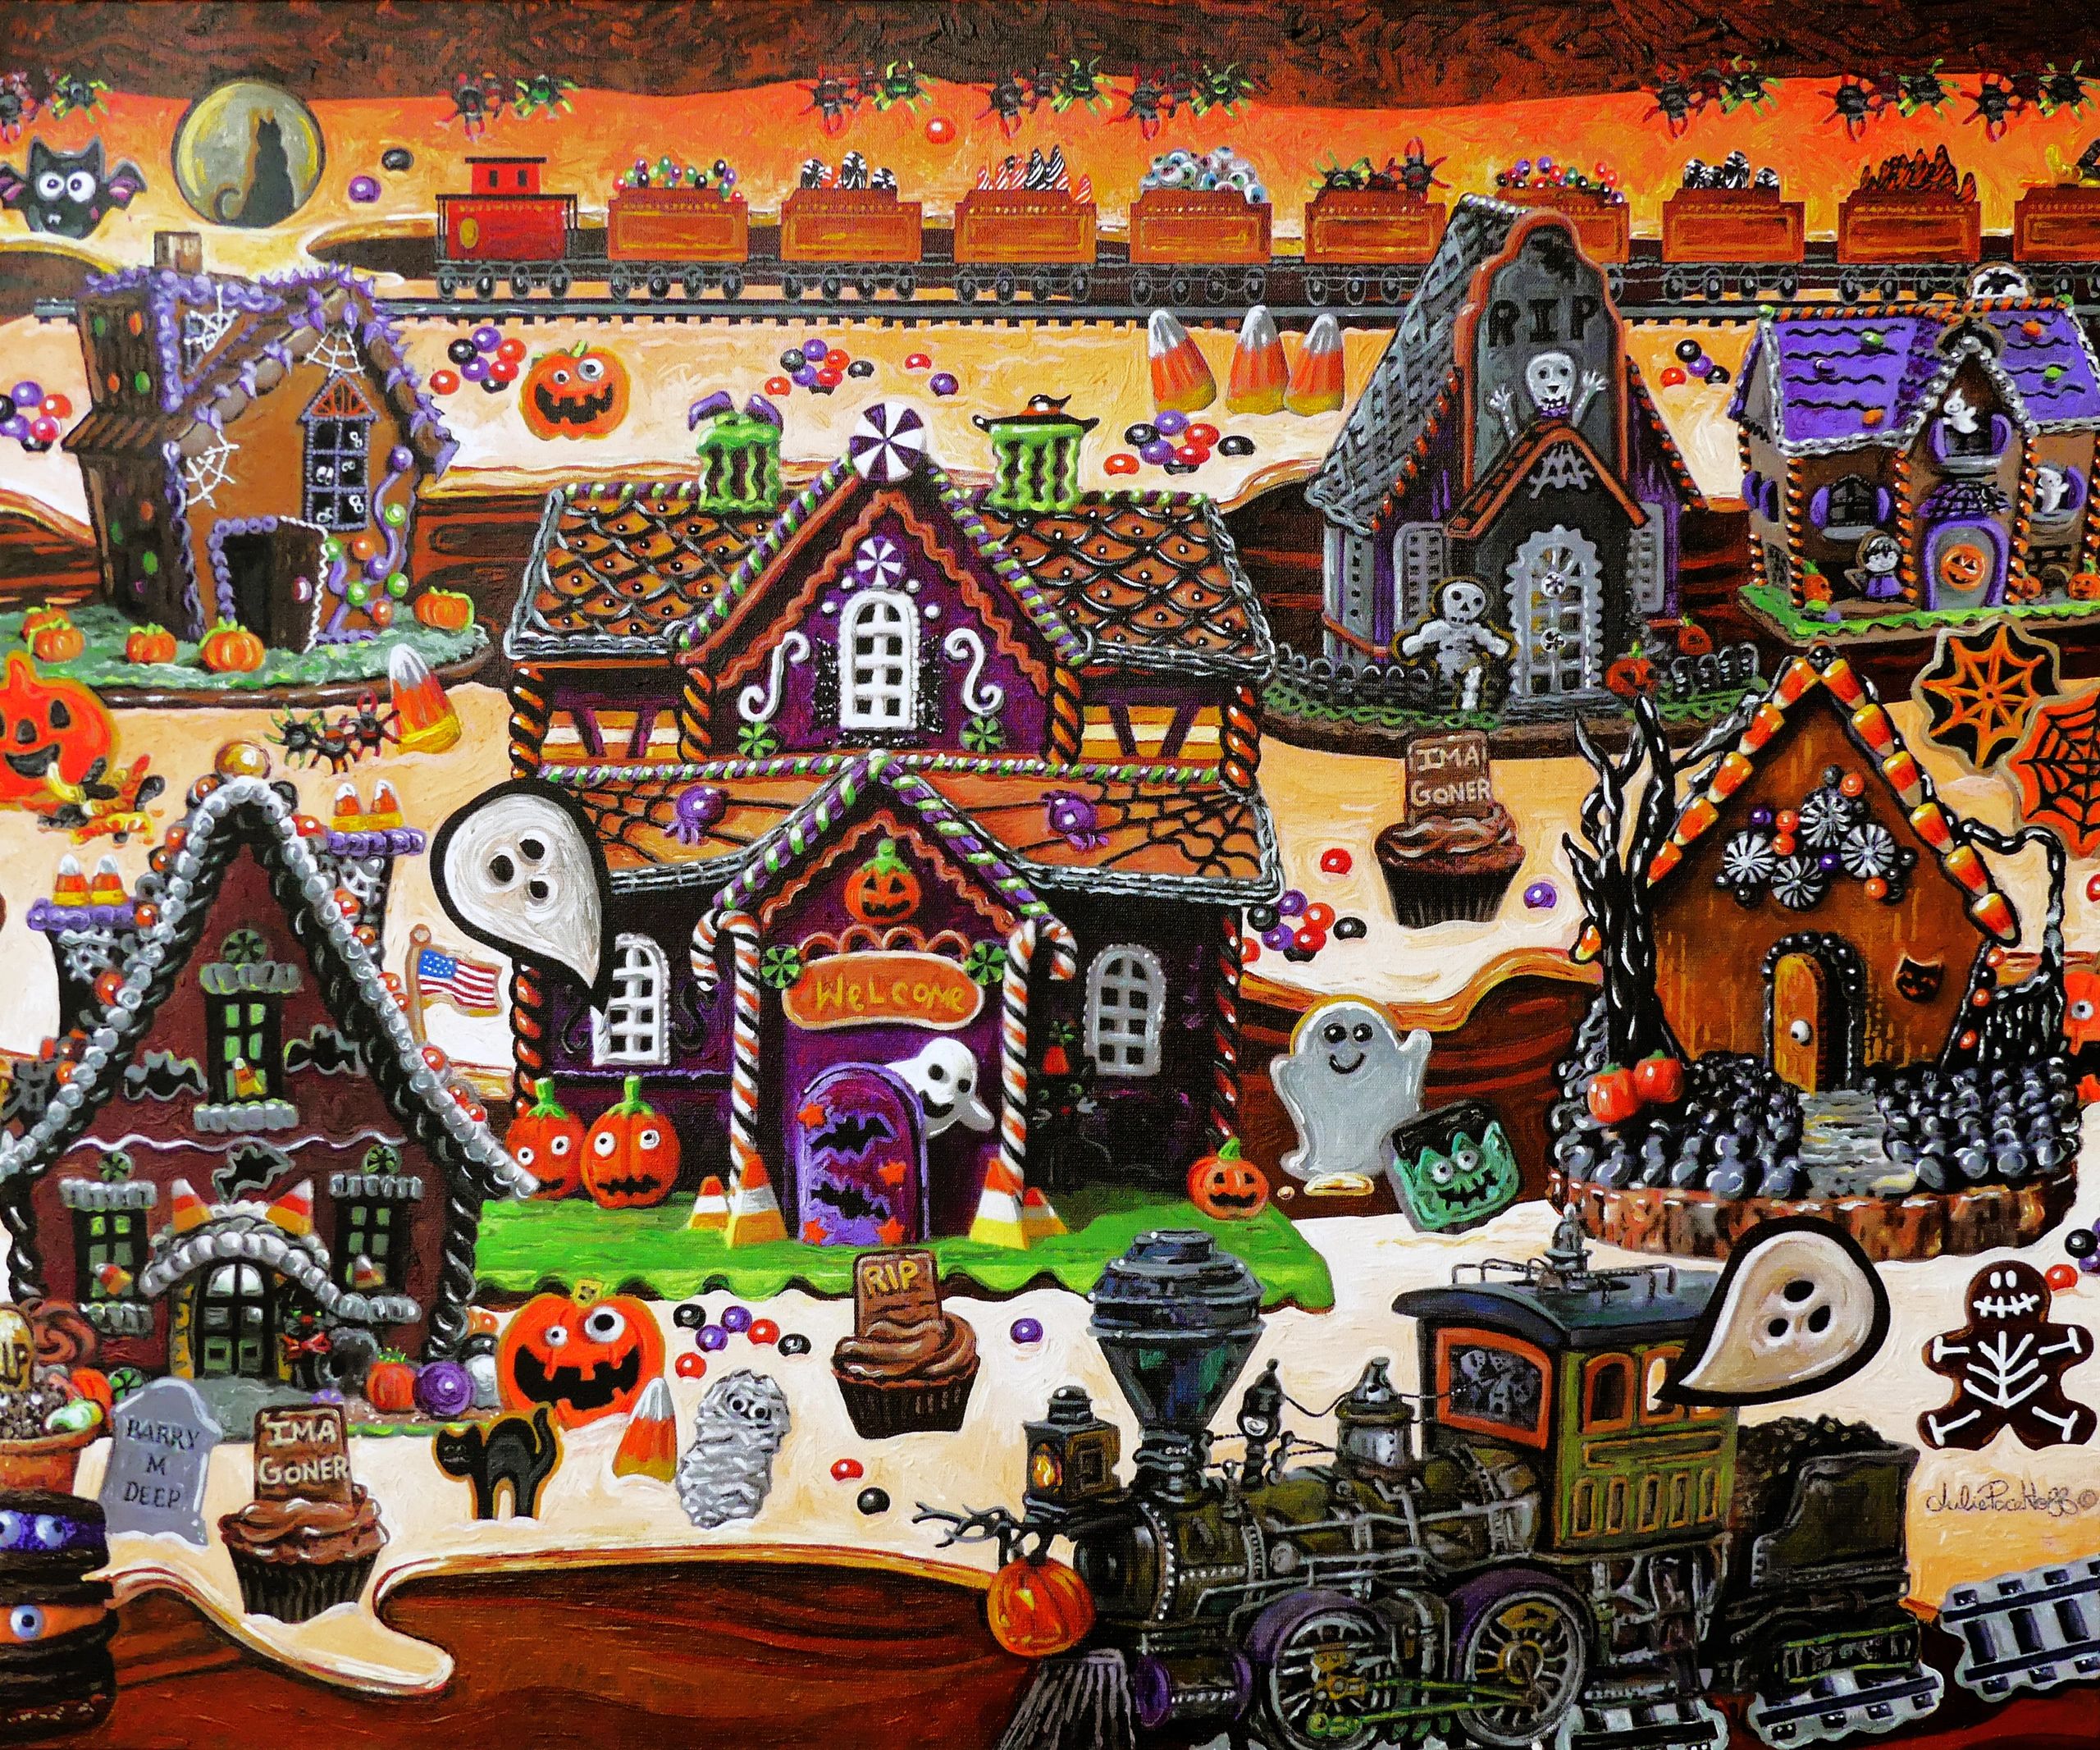 An imaginative Halloween haunted sugar cookie village of bright oranges and browns.